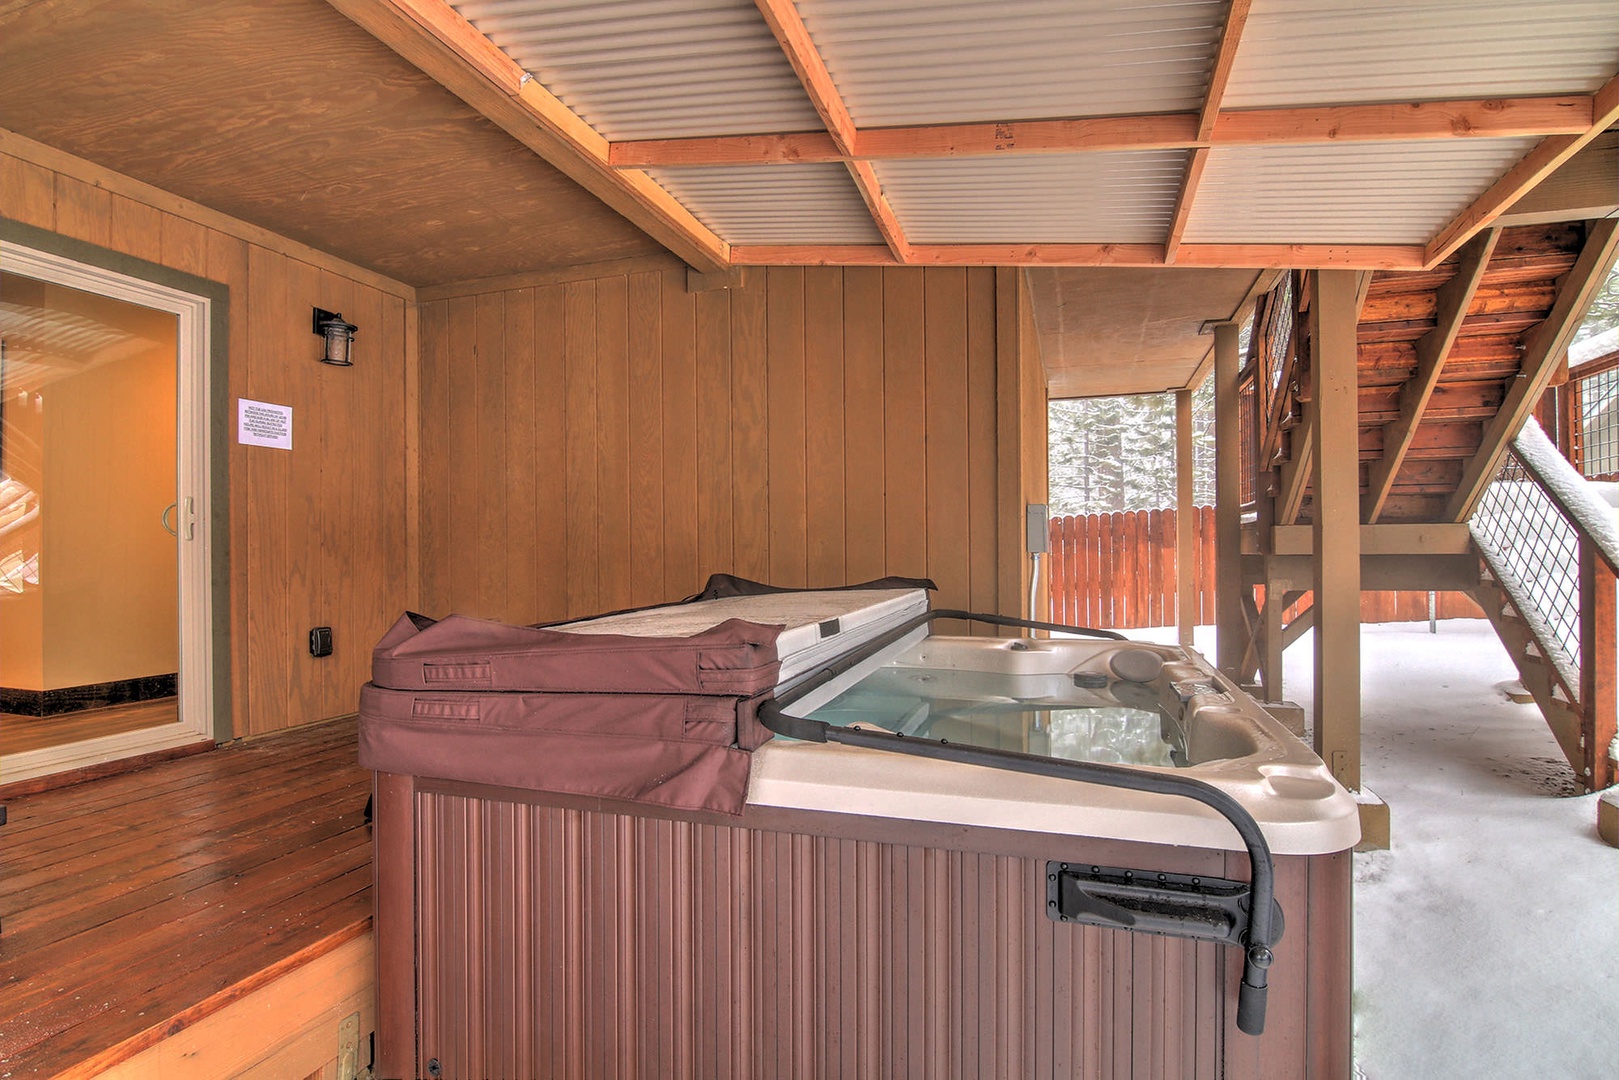 Enjoy a soak in the private outdoor hot tub